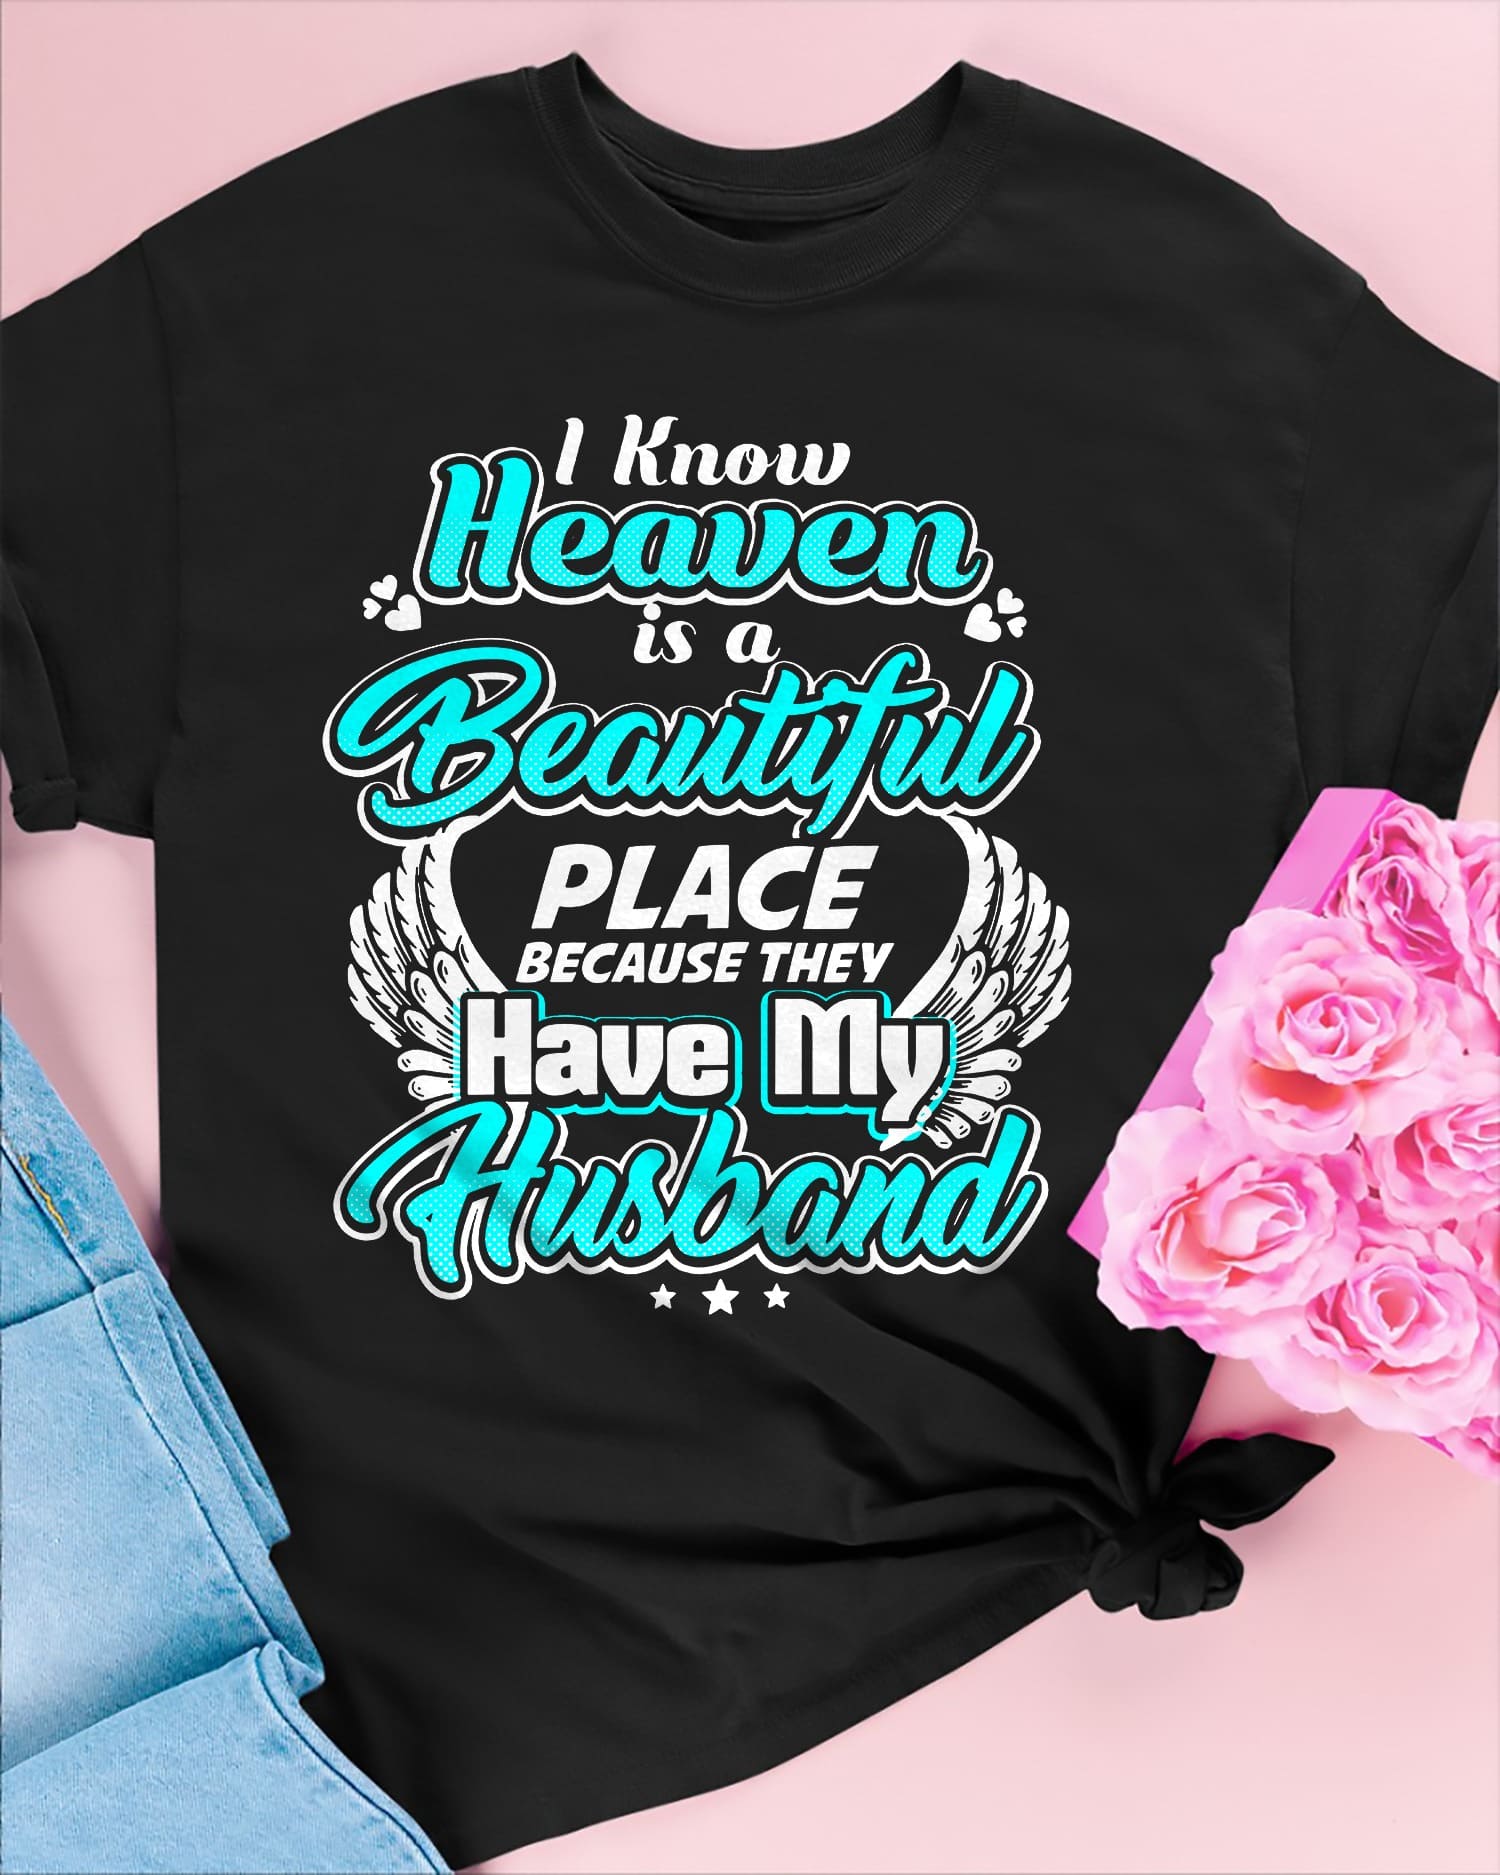 I know heaven is a beautiful place because they have my husband - Husband's wings, husband in heaven This T-Shirt, Hoodie, Sweatshirt, Ladies T-Shirt, Youth T-shirt is for lovers like  heaven is beautiful place, they have my husband, Husband's wings, husband in heaven  Shirt are much suitable for those who Love Hobbies, Holidays, Pets, Movies, Out Door, Sport.